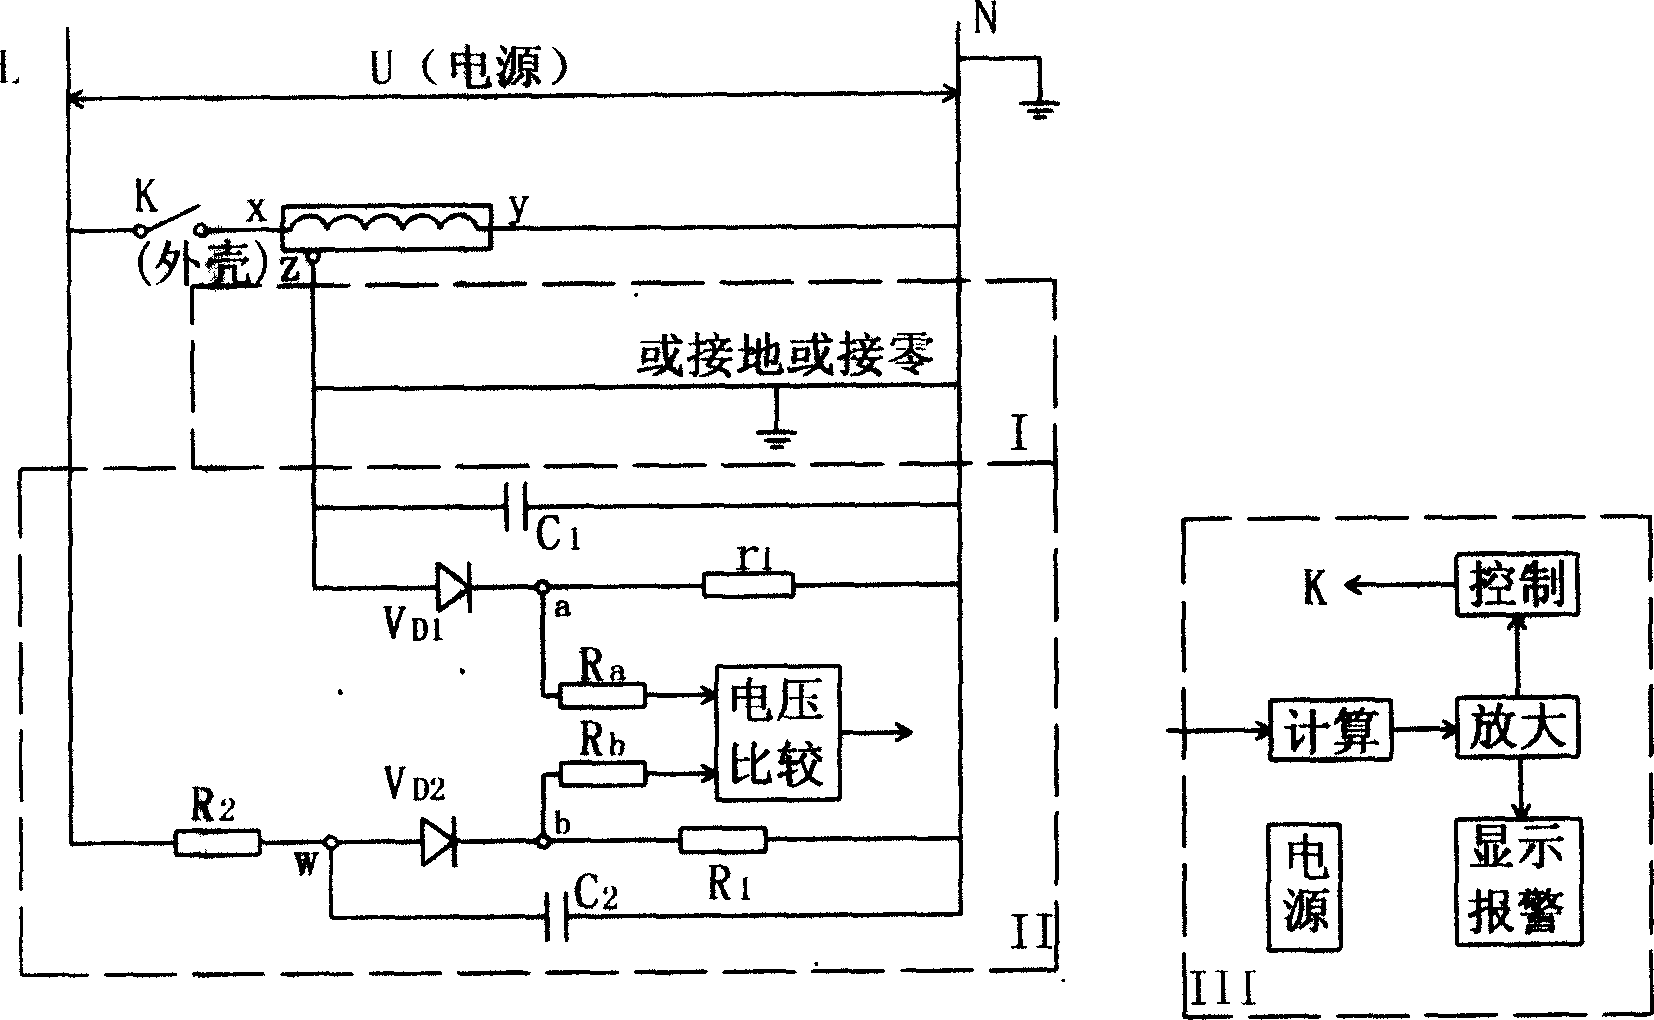 Method for detecting shell drain voltage of working appliance (power) equipment and two-step anti-electric-shock scheme